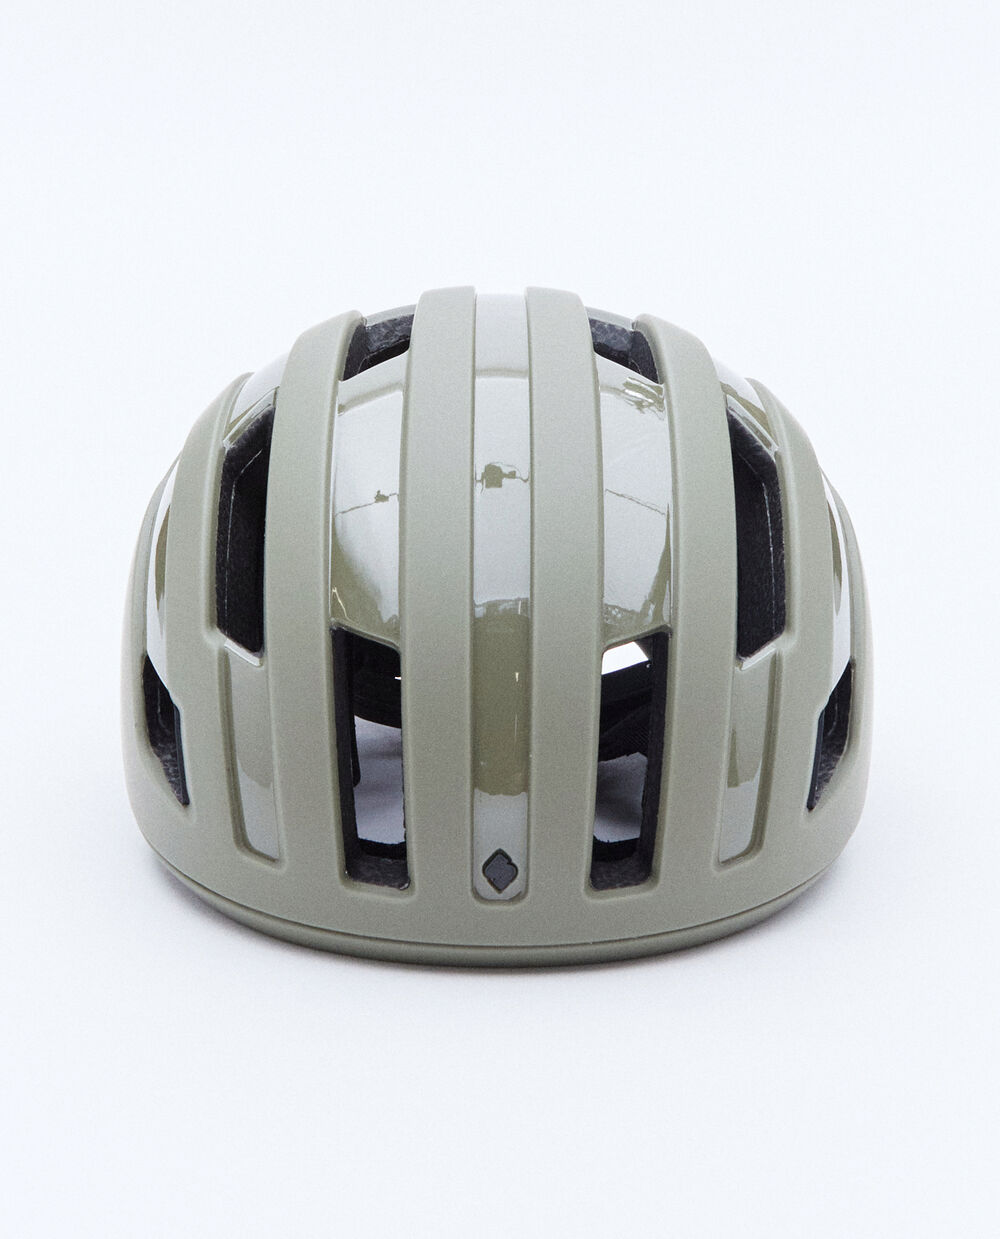 SWEET PROTECTION OUTRIDER HELMET